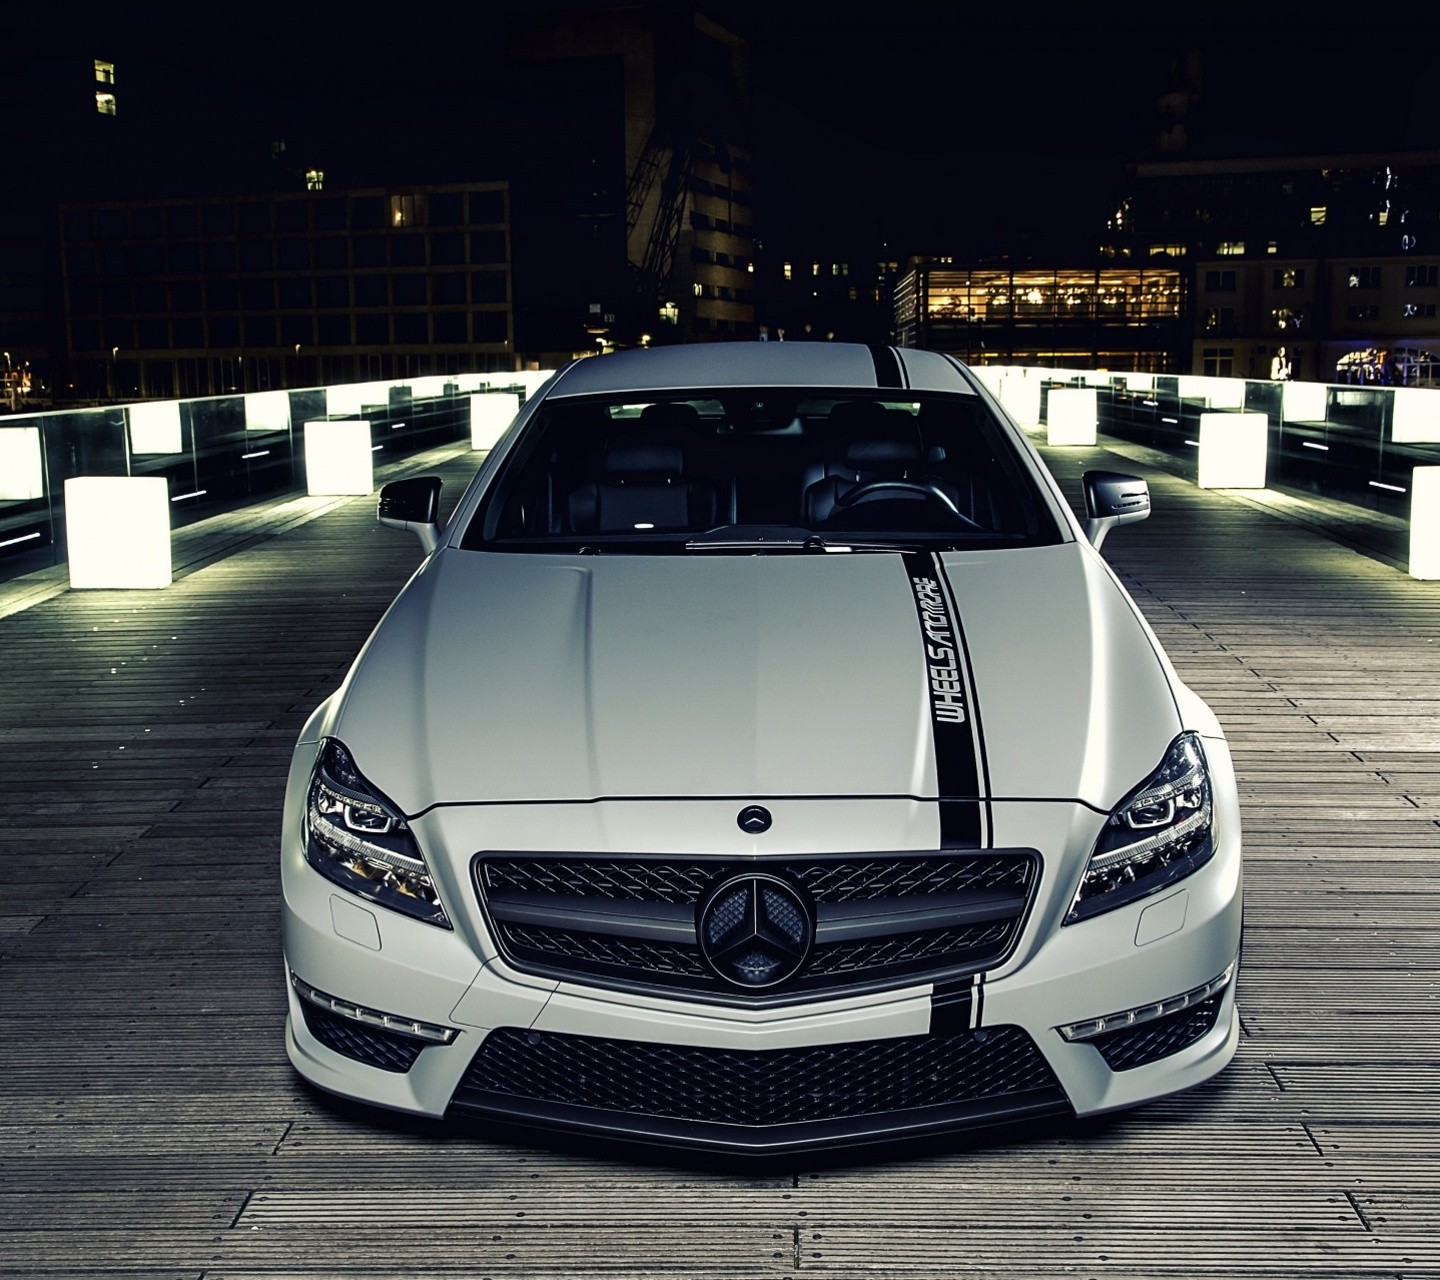 Mercedes Benz, Car Wallpapers HD / Desktop and Mobile Backgrounds